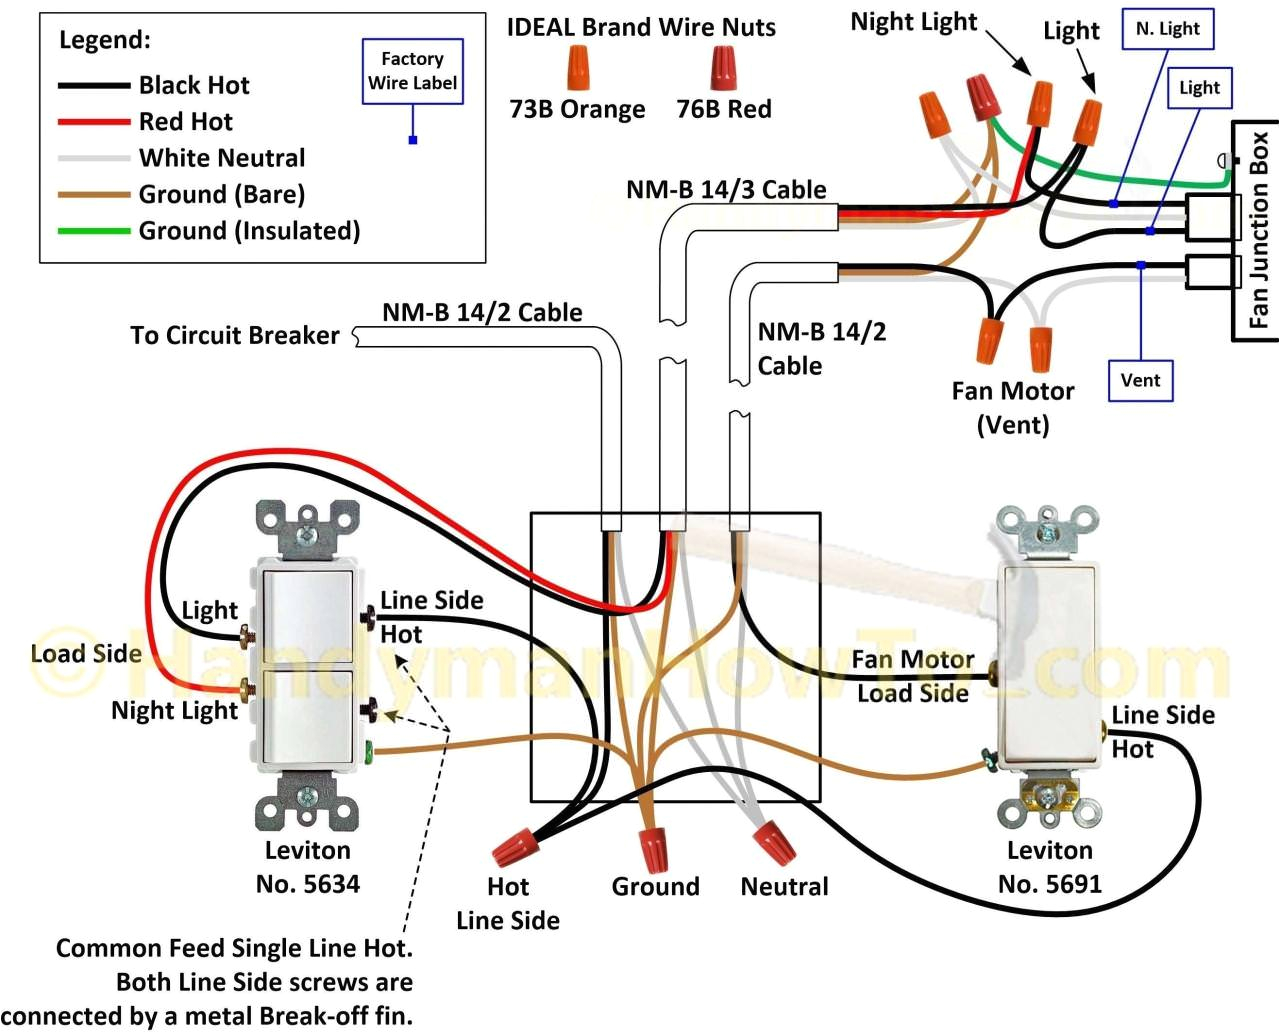 pentair pumps wiring diagrams wire management u0026 wiring diagram mix wiring diagram pentair premium wiring